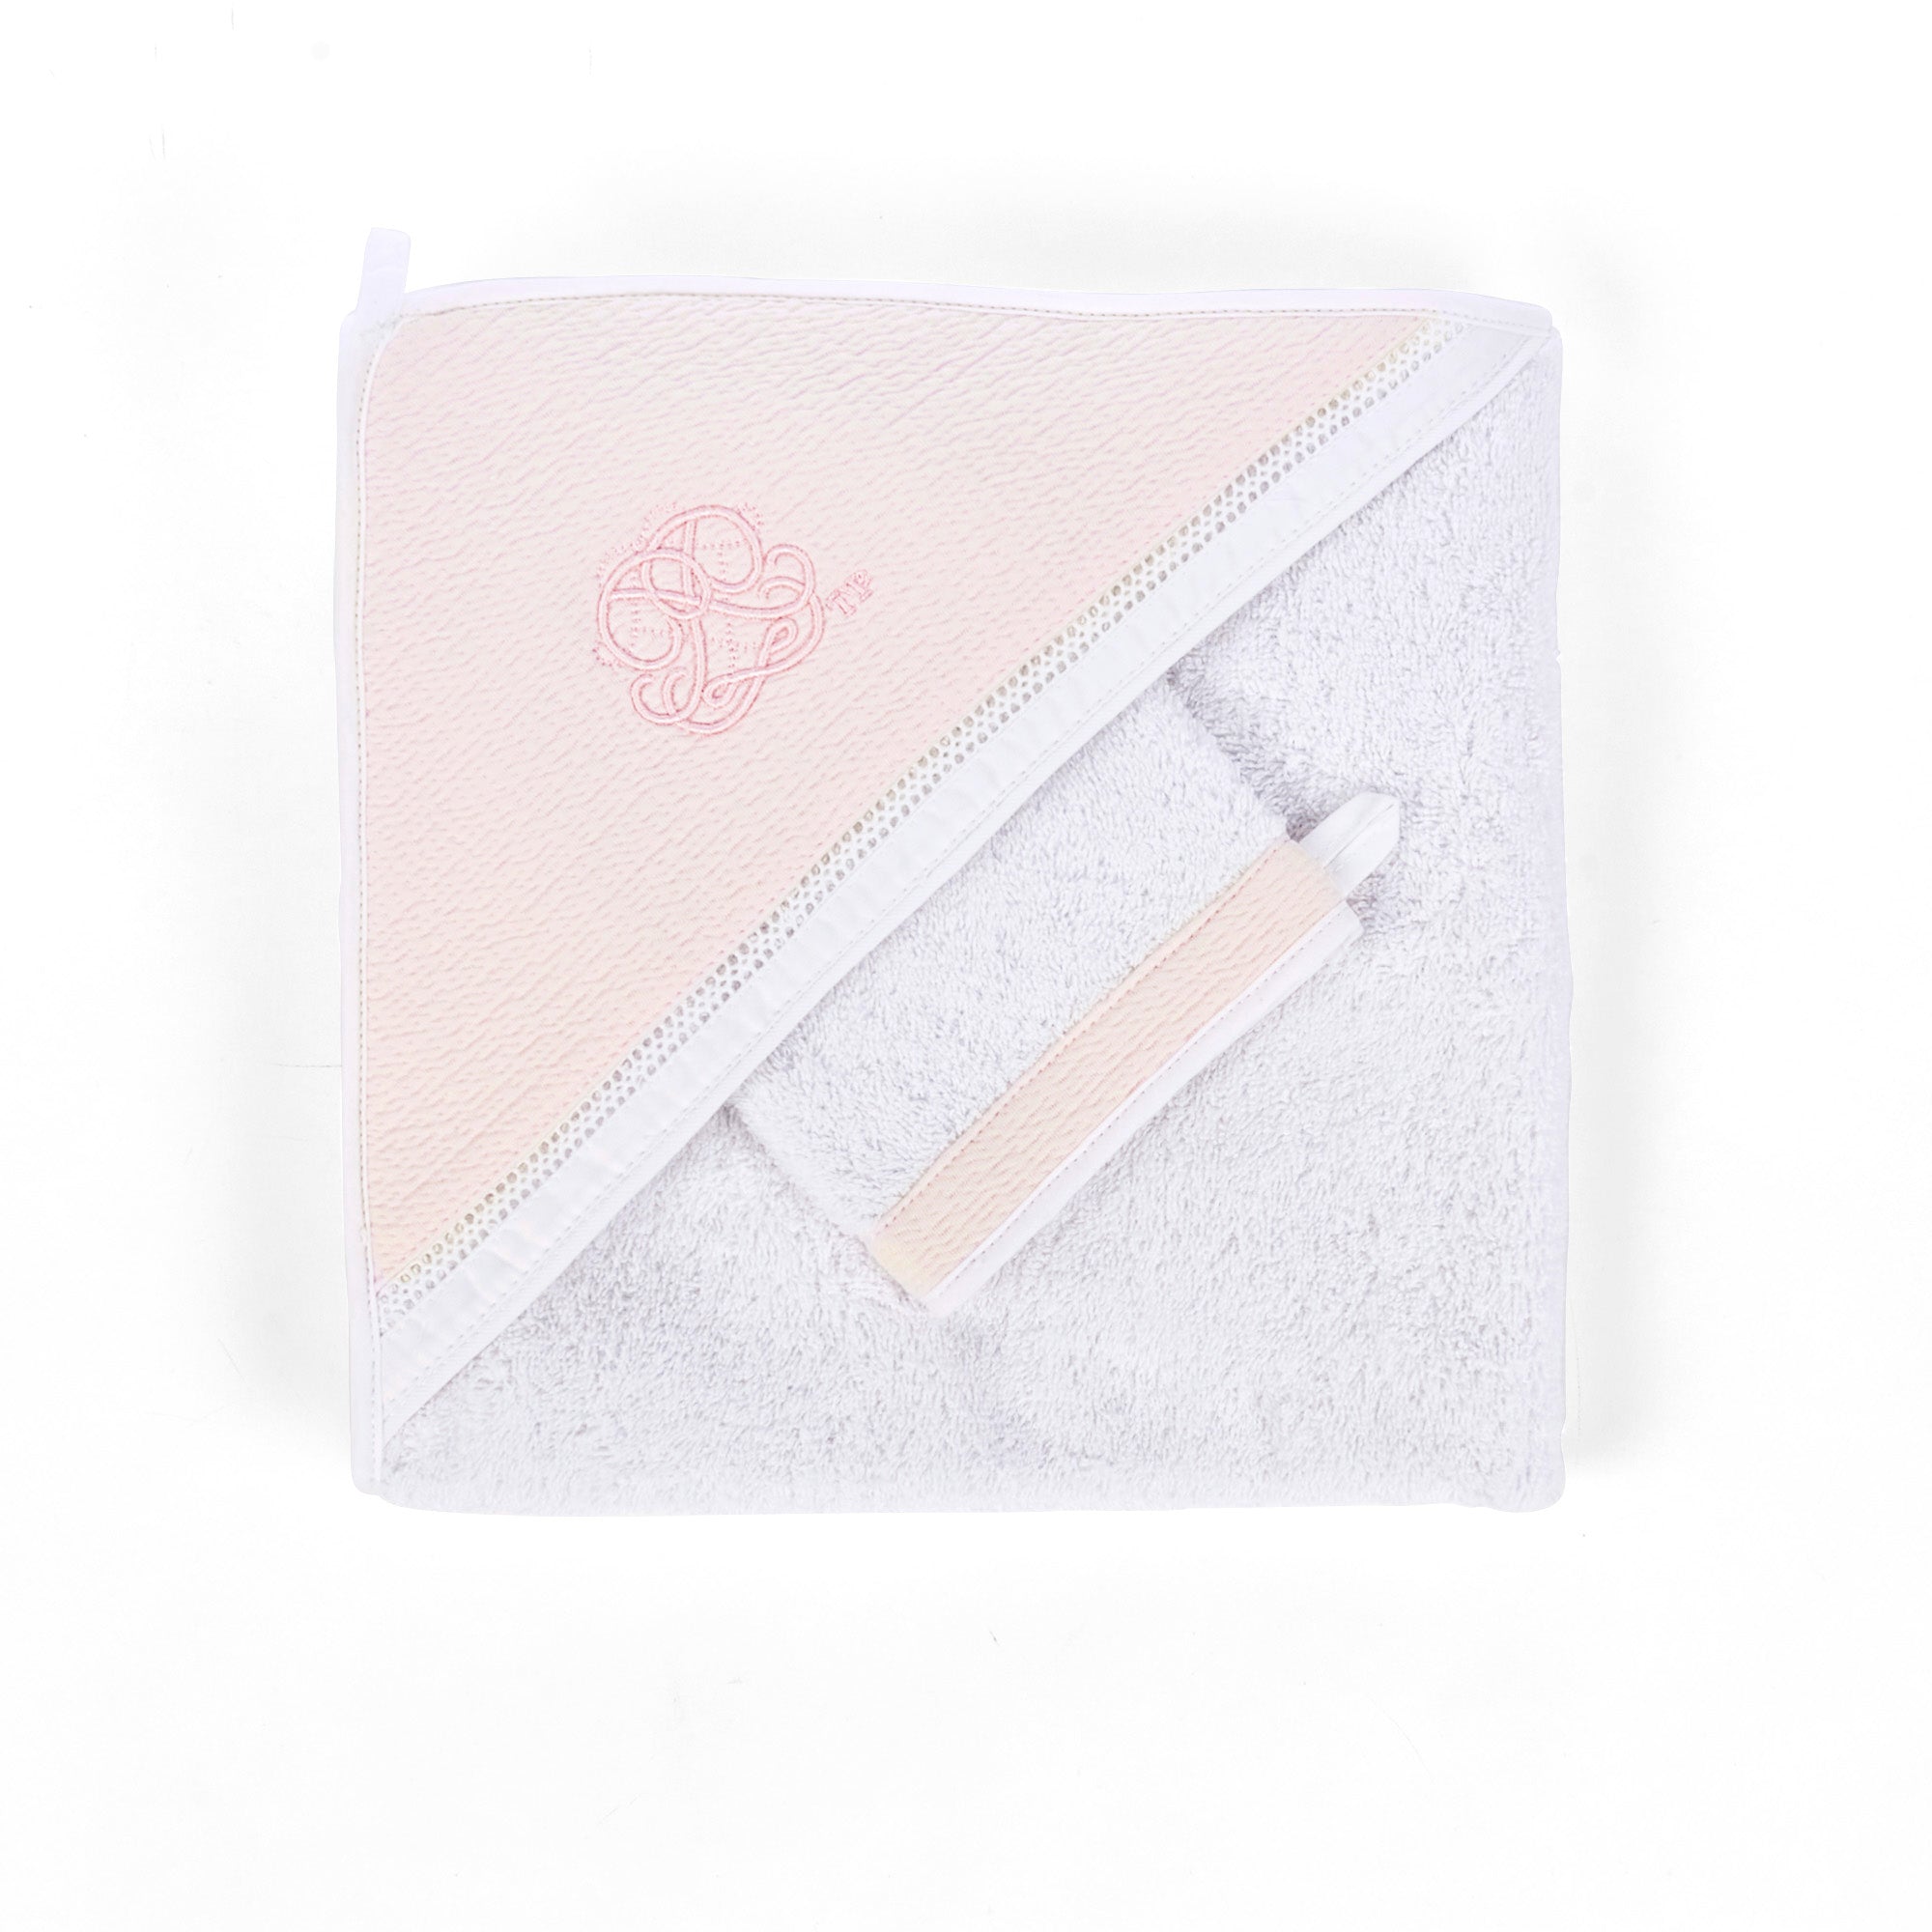 Theophile & Patachou Hooded Towel - Cotton Pink